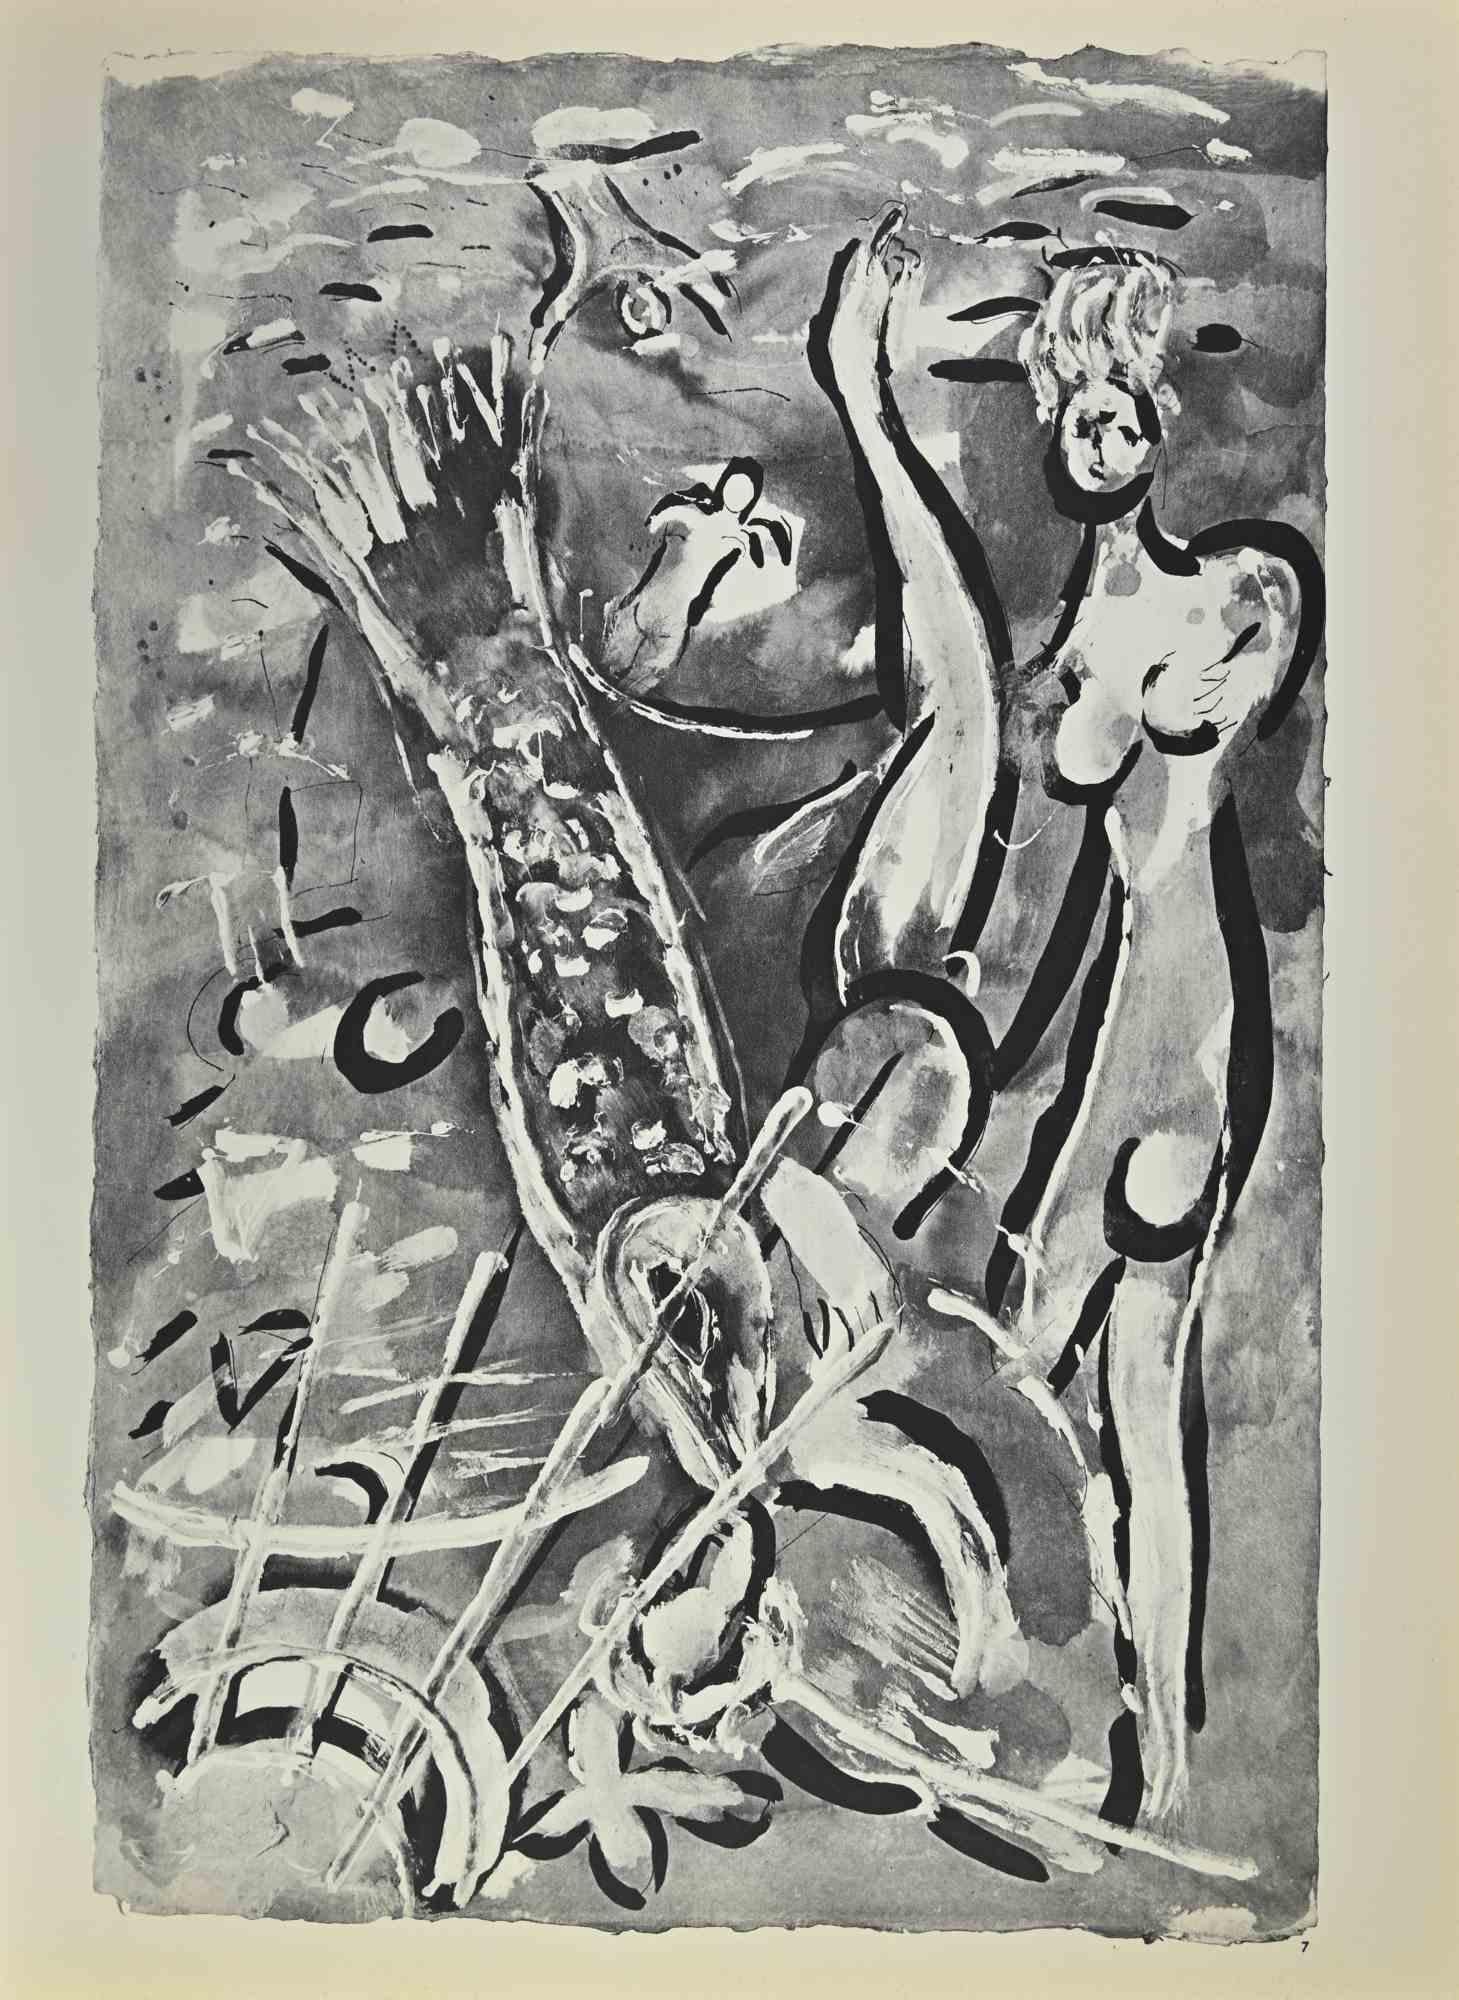 Nimrod  is an artwork realized by March Chagall, 1960s.

Lithograph on brown-toned paper, no signature.

Lithograph on both sheets.

Edition of 6500 unsigned lithographs. Printed by Mourlot and published by Tériade, Paris.

Ref. Mourlot, F., Chagall